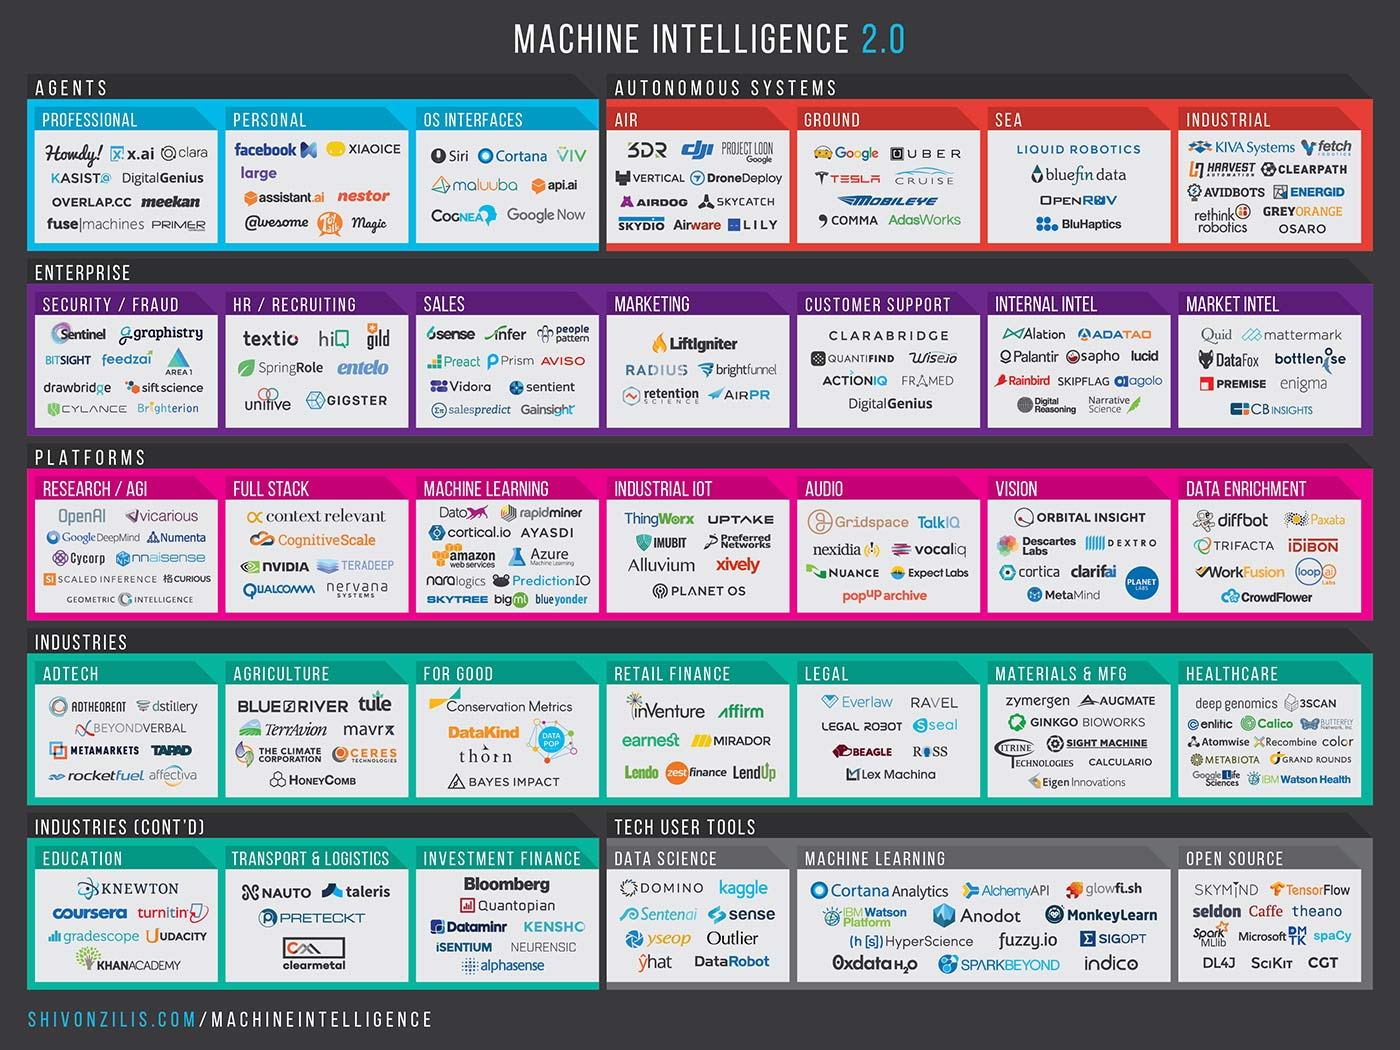 Overview of the machine intelligence landscape